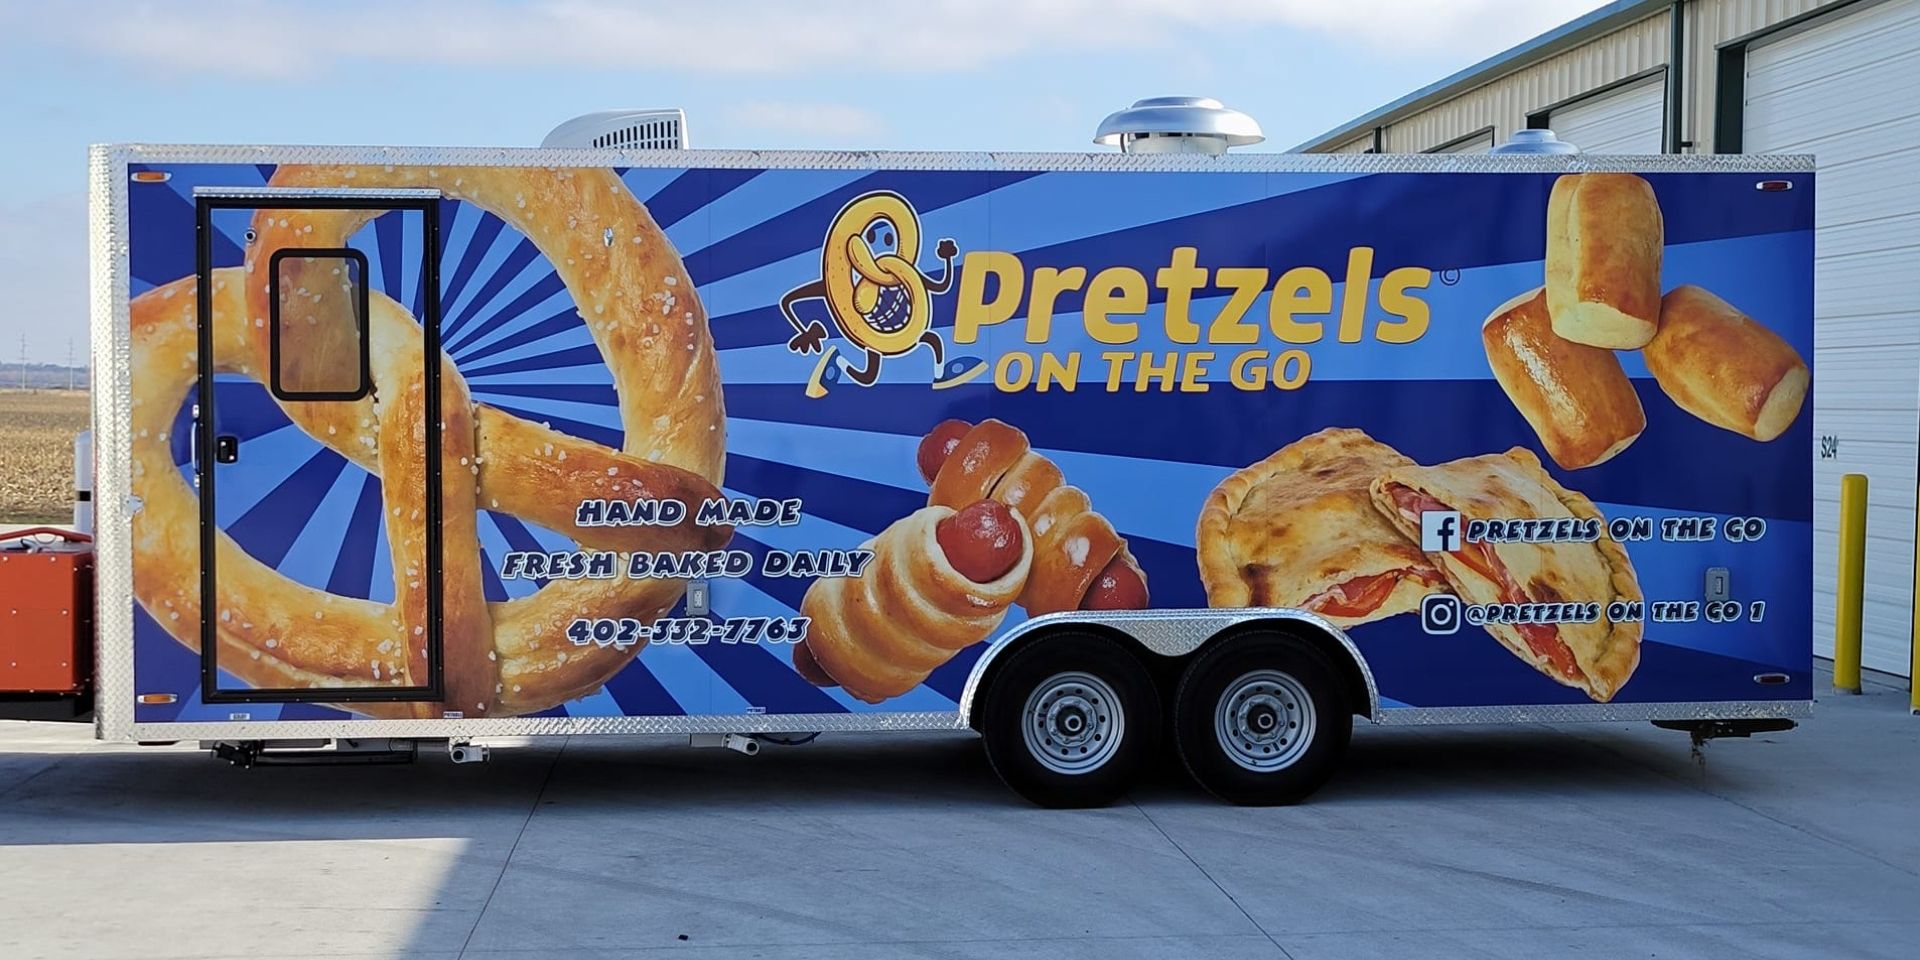 Wednesday Night Food Truck - Pretzels on the Go promotional image